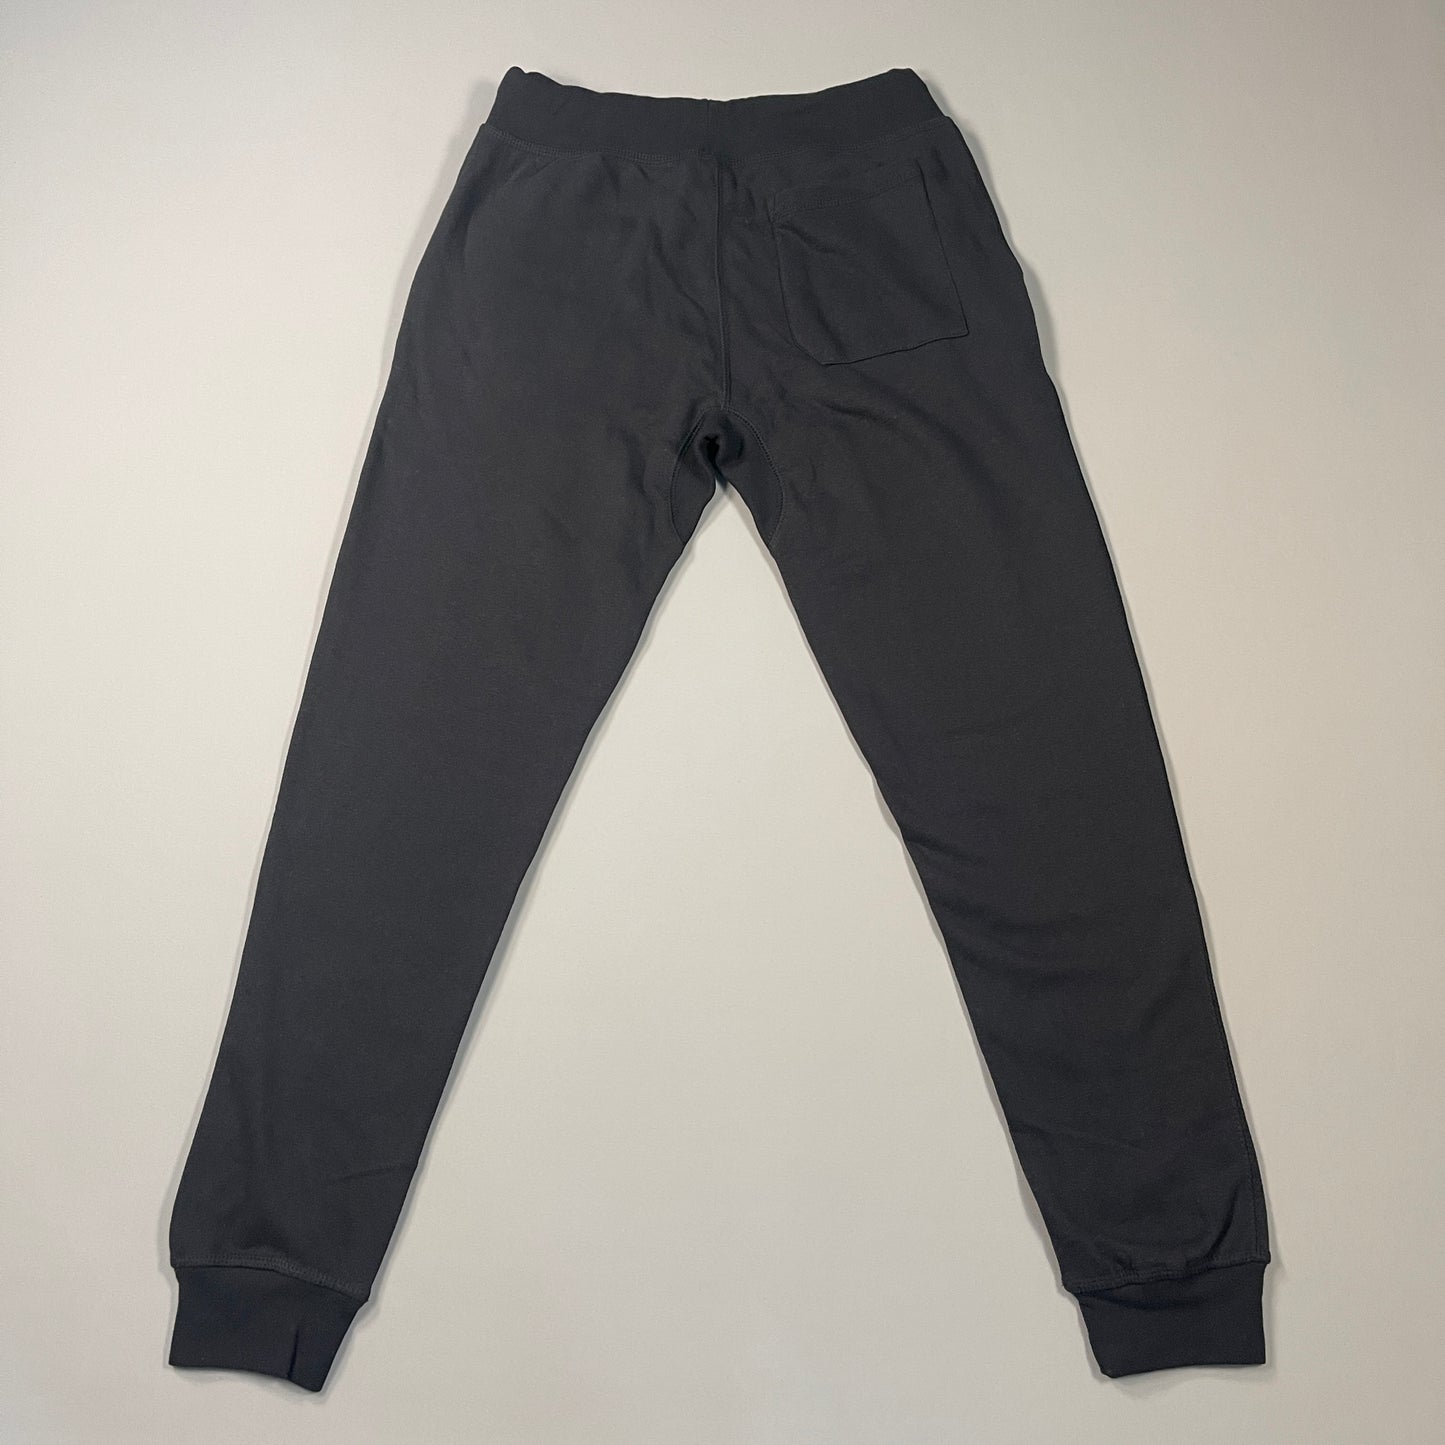 BLVCK PRIVILEGE Sweat Pants With Chenille Patch Seal Men's Sz S Black (New)